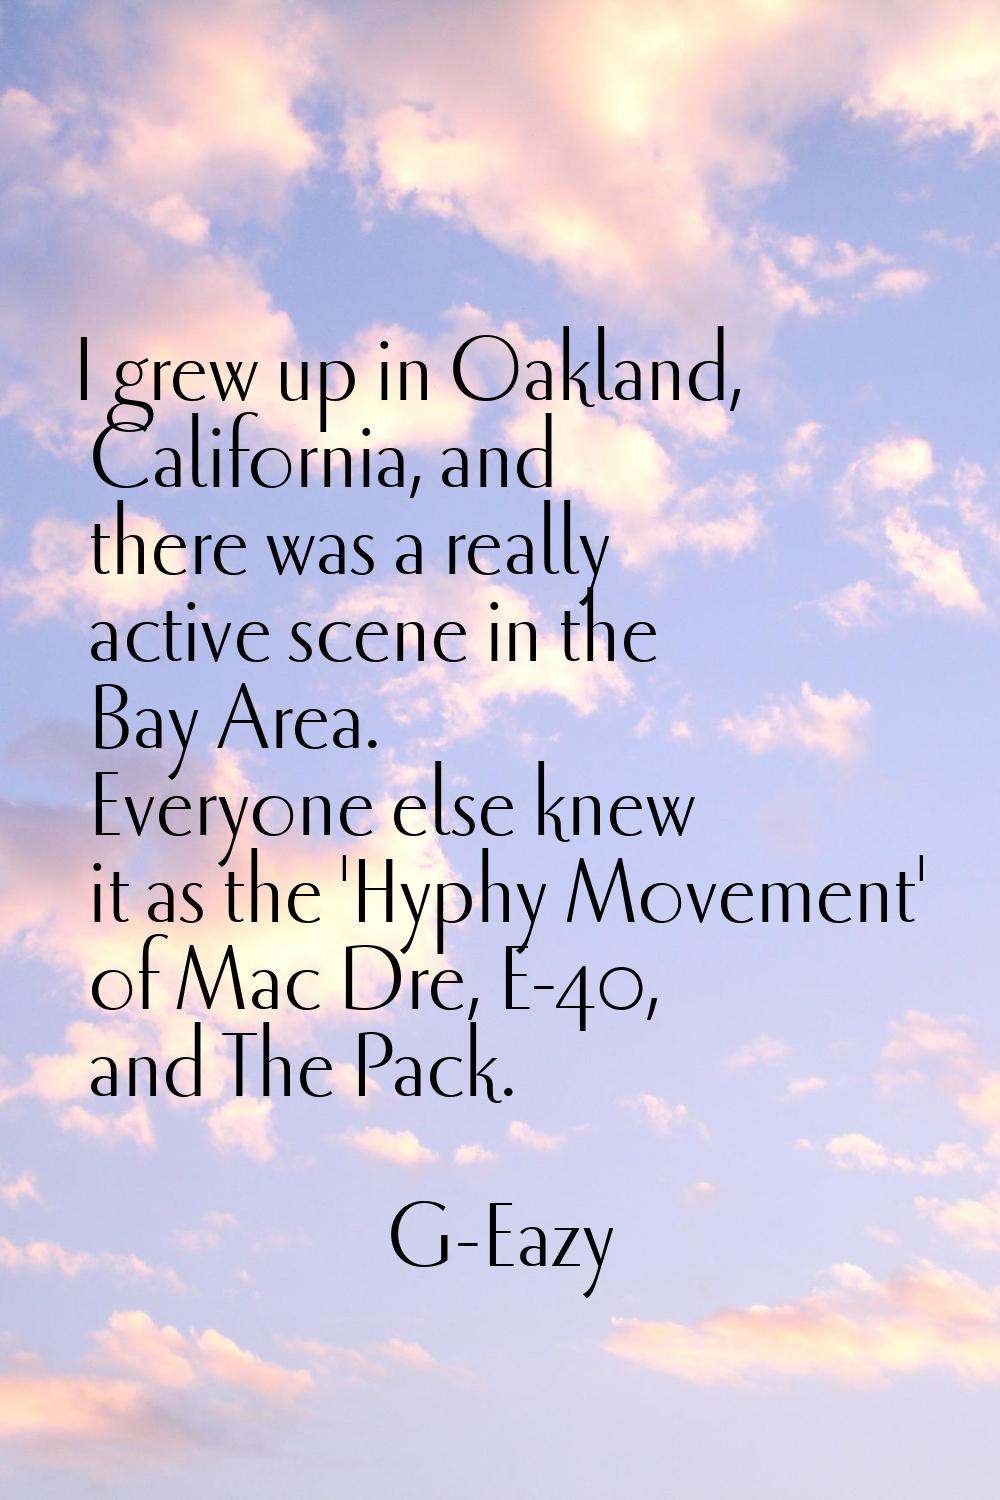 I grew up in Oakland, California, and there was a really active scene in the Bay Area. Everyone els